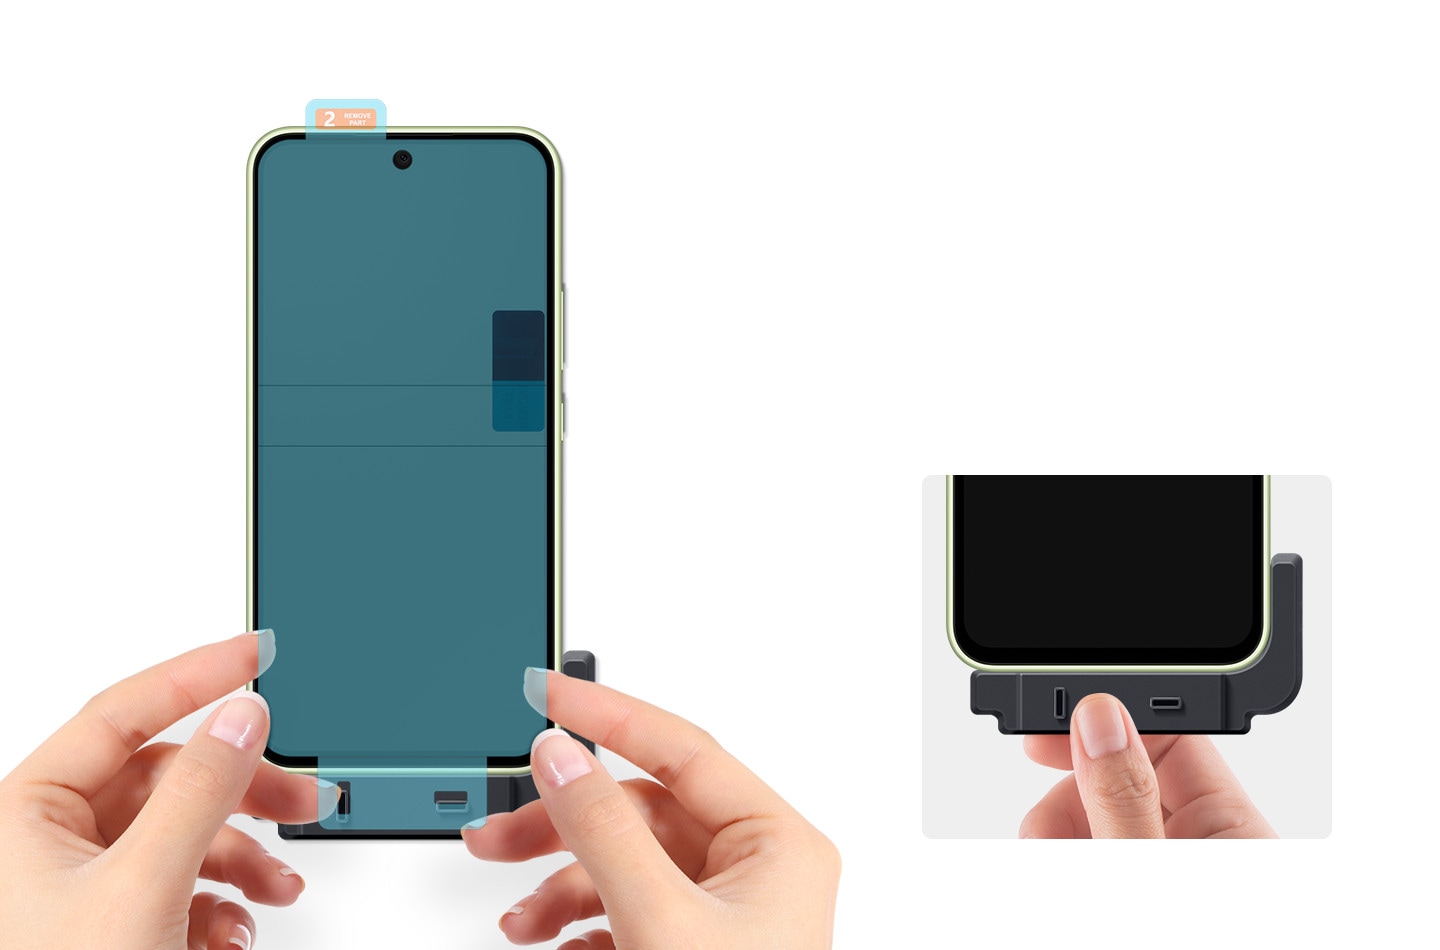 On the left, two hands are using the provided frame to cleanly install the Screen Protector. On the right, a hand holds up part of the frame after finishing an easy installation.